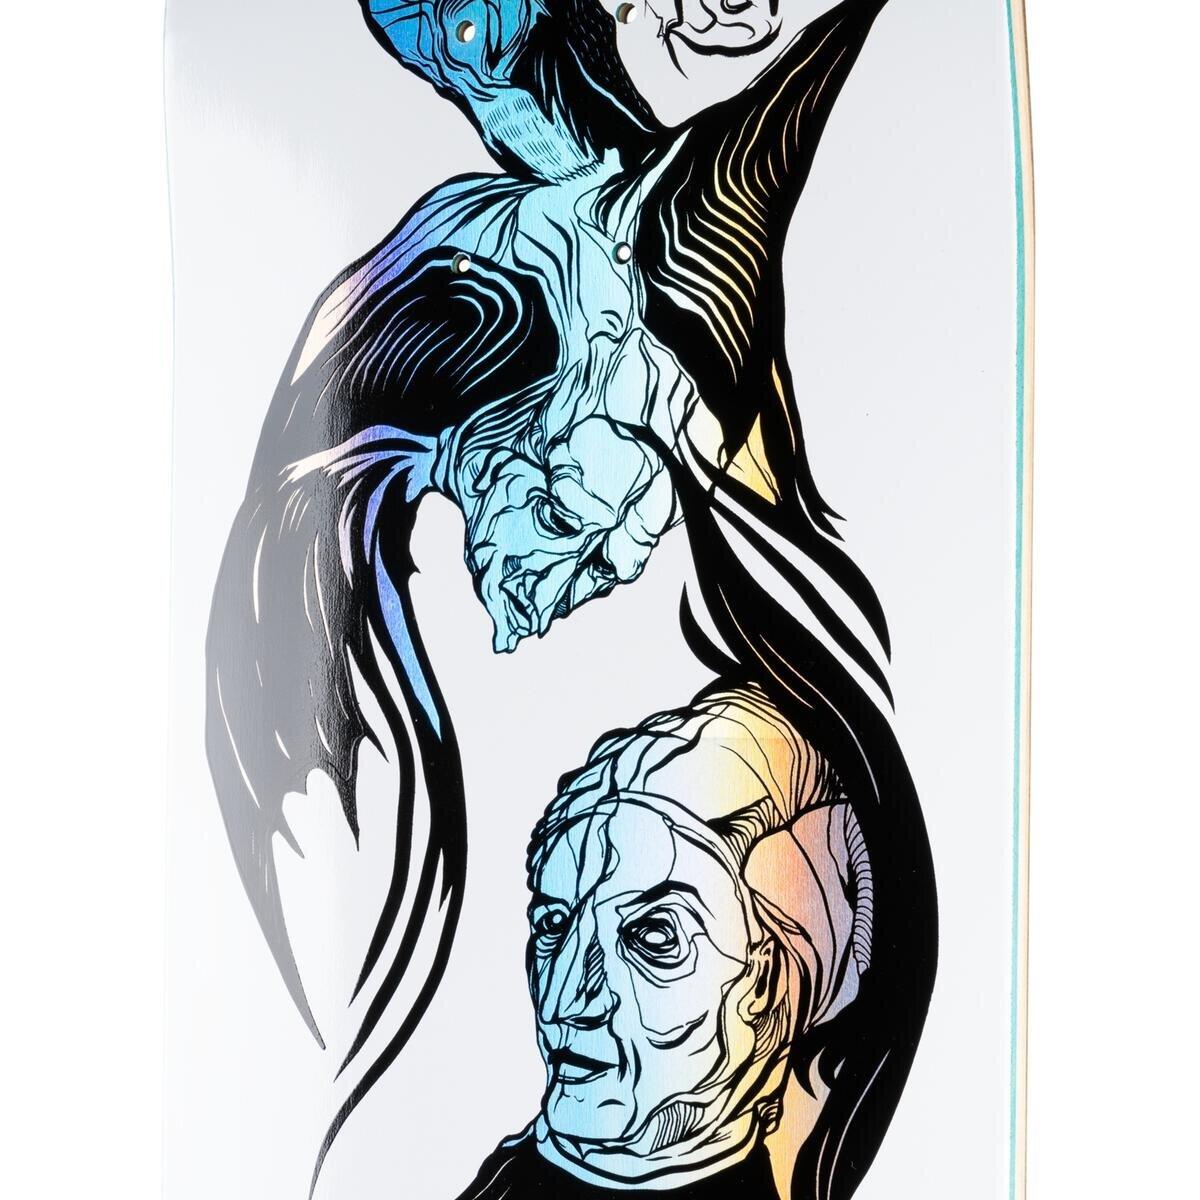 FIRE SALE Welcome Skateboards "ISOBEL on STONECIPHER" 8.6" Deck